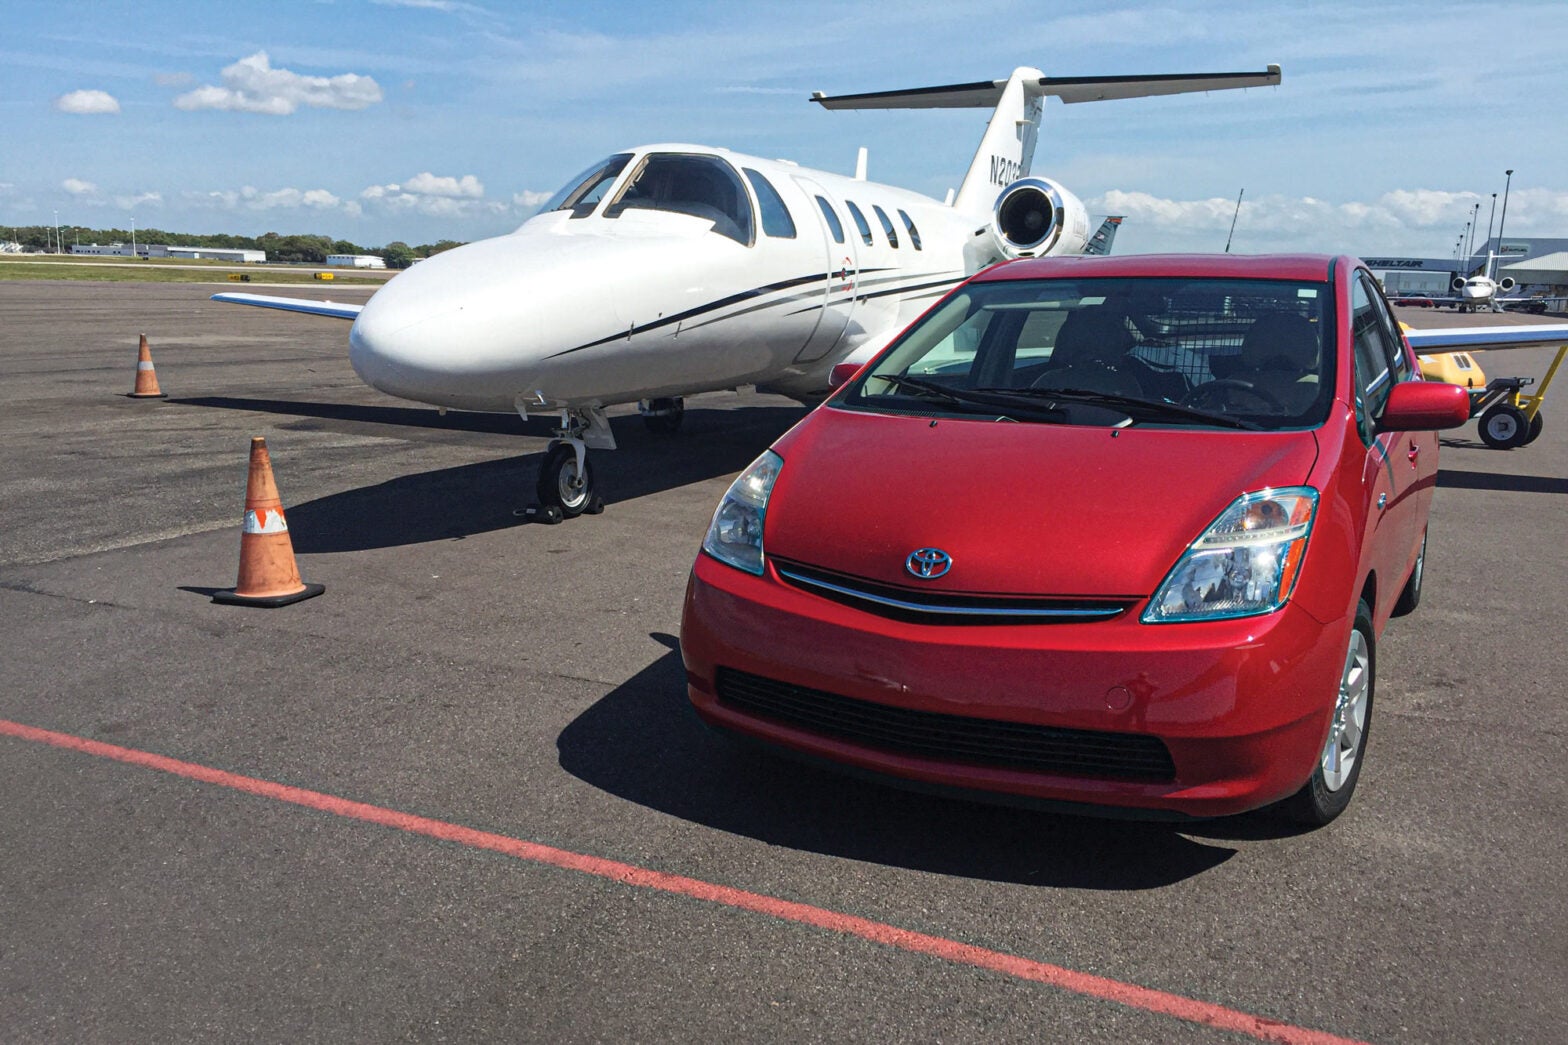 Gear Up: The Prius and the Private Plane